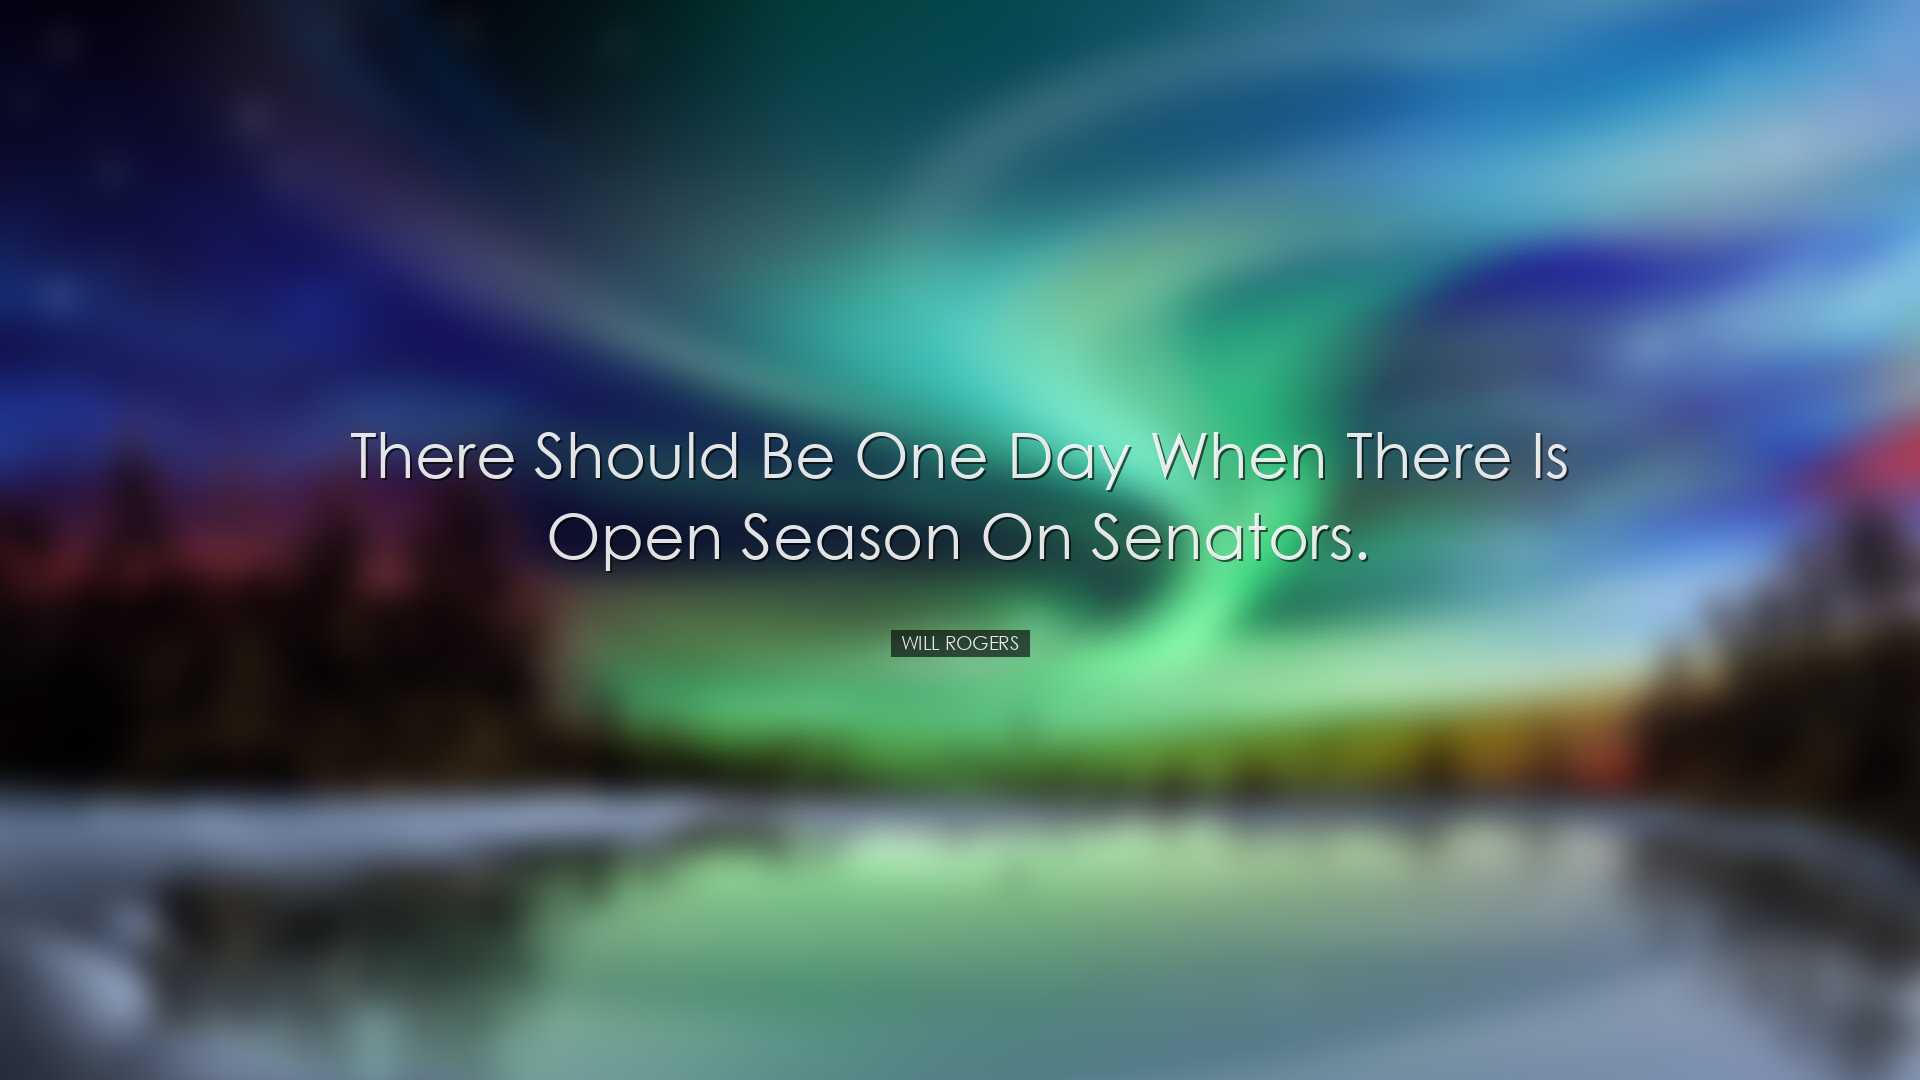 There should be one day when there is open season on senators. - W